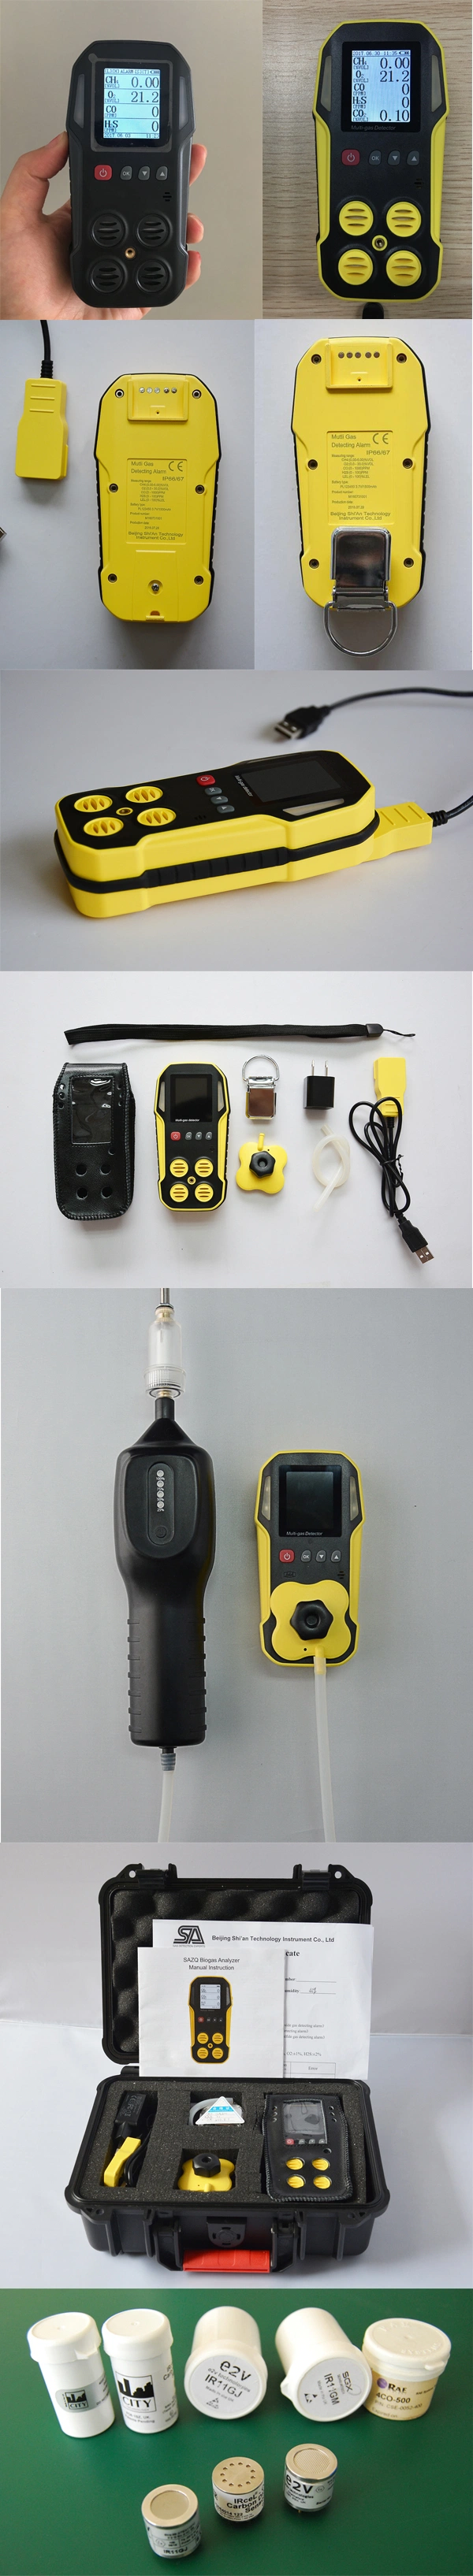 OEM Rechargeable Portable Gas Monitor/Detector with UK Sensor 4 Gas Detector